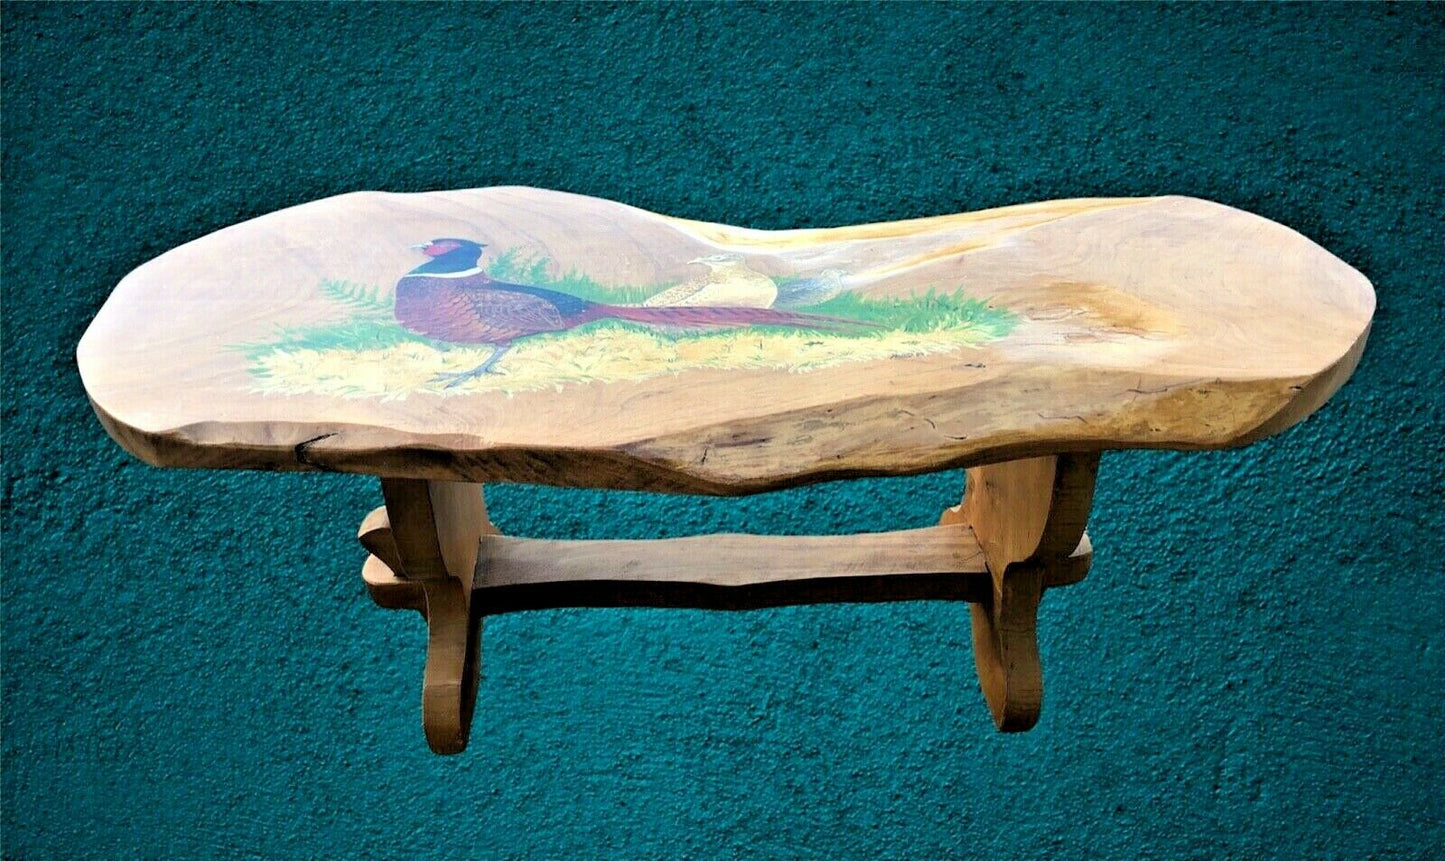 000987.....Heavy Vintage Ash Coffee Table With Hand Painted Decoration ( sold )